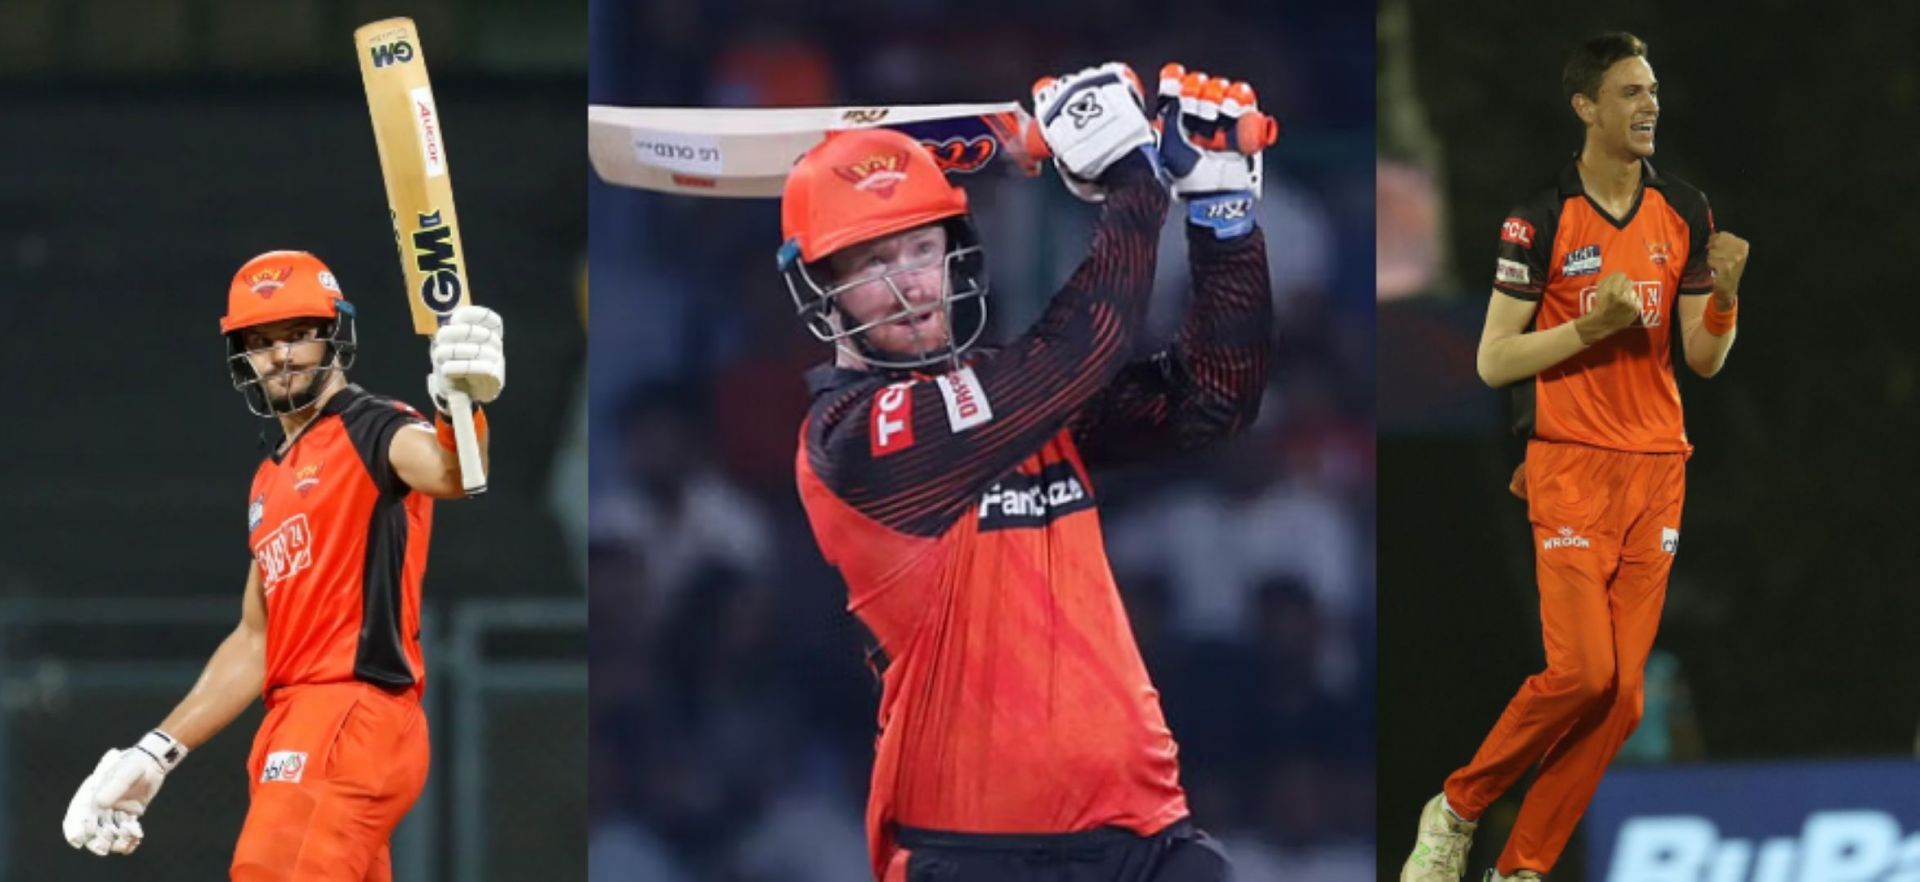 The South African trio is almost certain to start in the SRH playing XI.